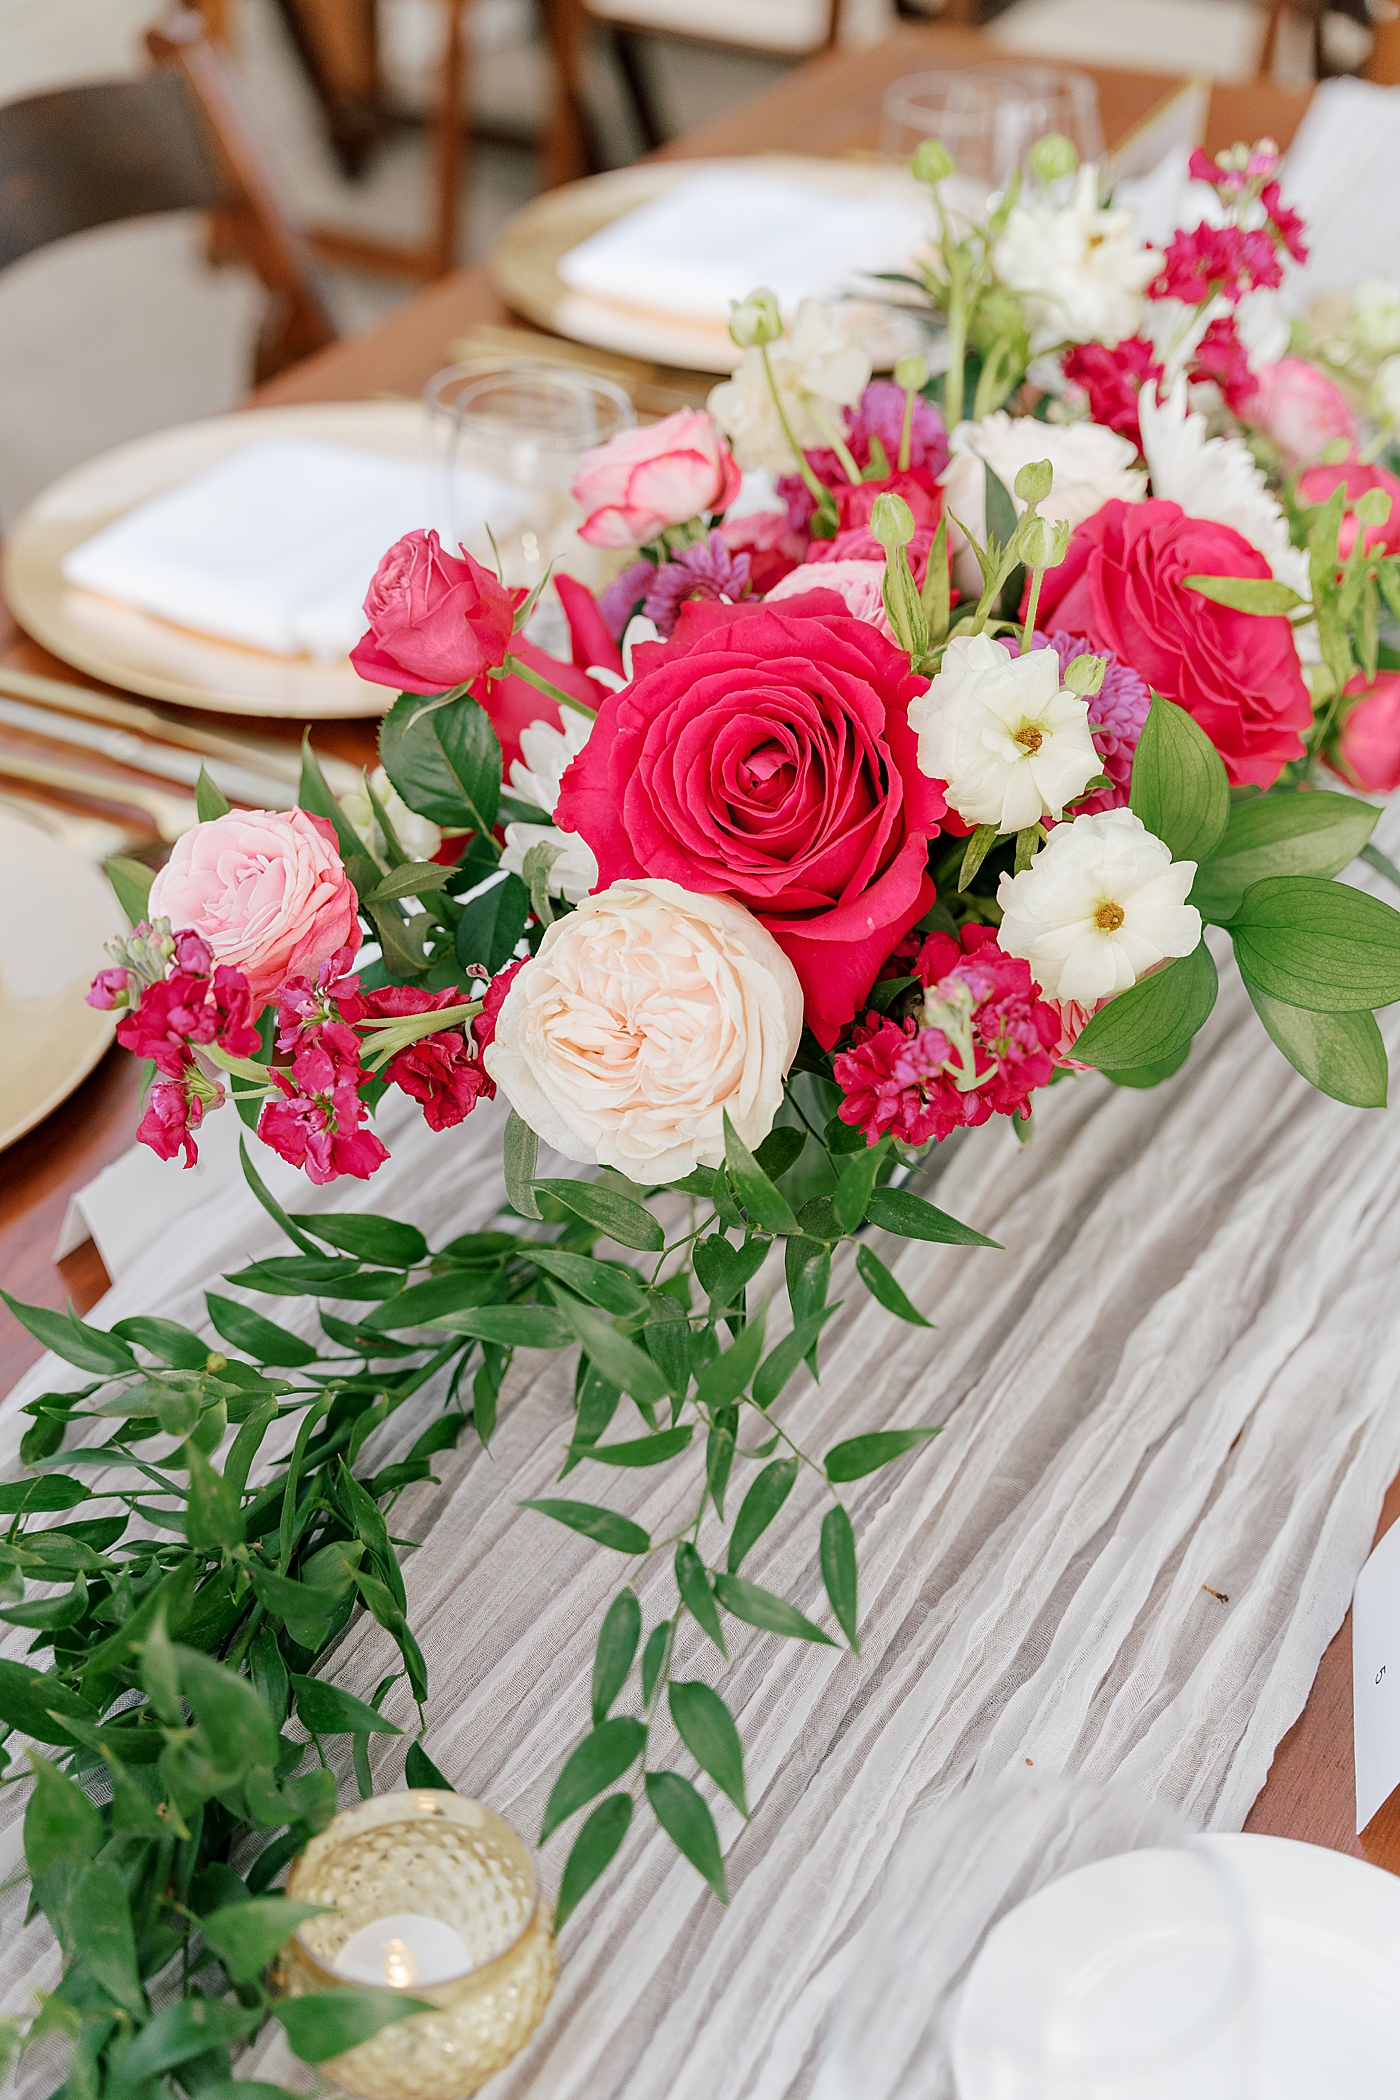 Detail of a wooden wedding dinner table with a white table runner, greenery, and a bright floral centerpiece | Image by San Diego Wedding Photographer Hope Helmuth